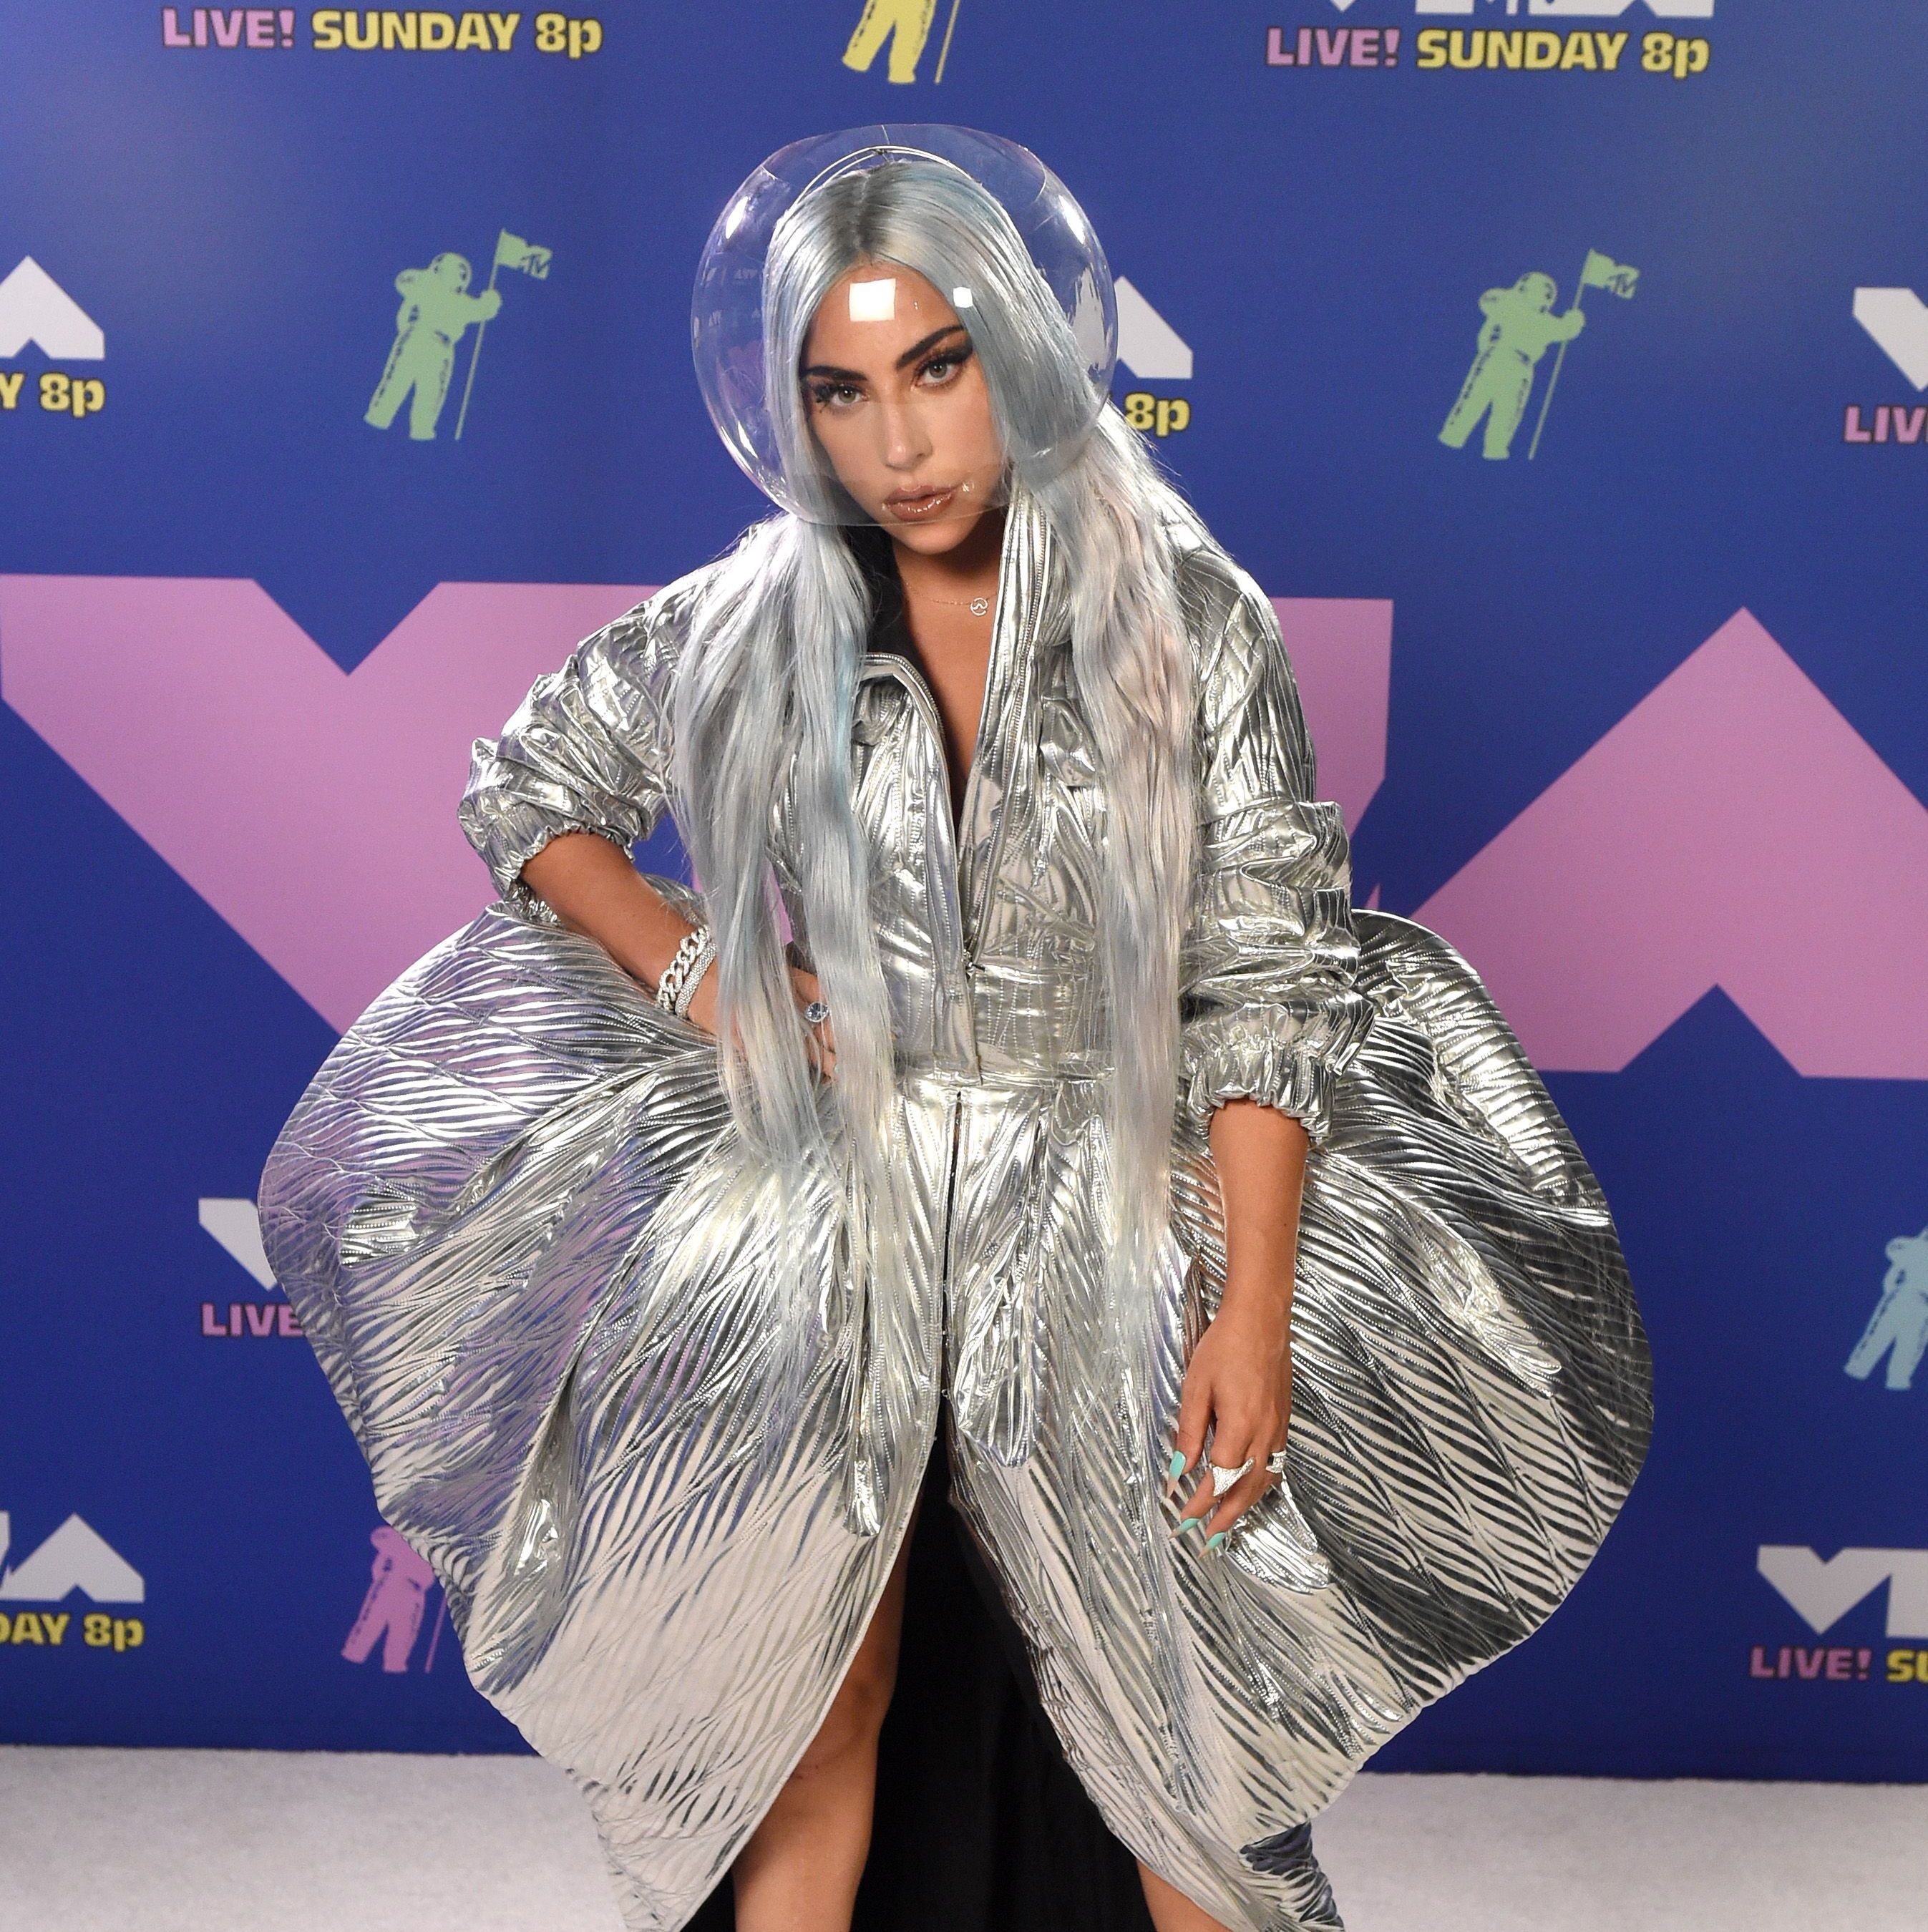 Lady Gaga Skipped the 2022 VMAs This Year Because She Had Other (Pretty Major) Plans